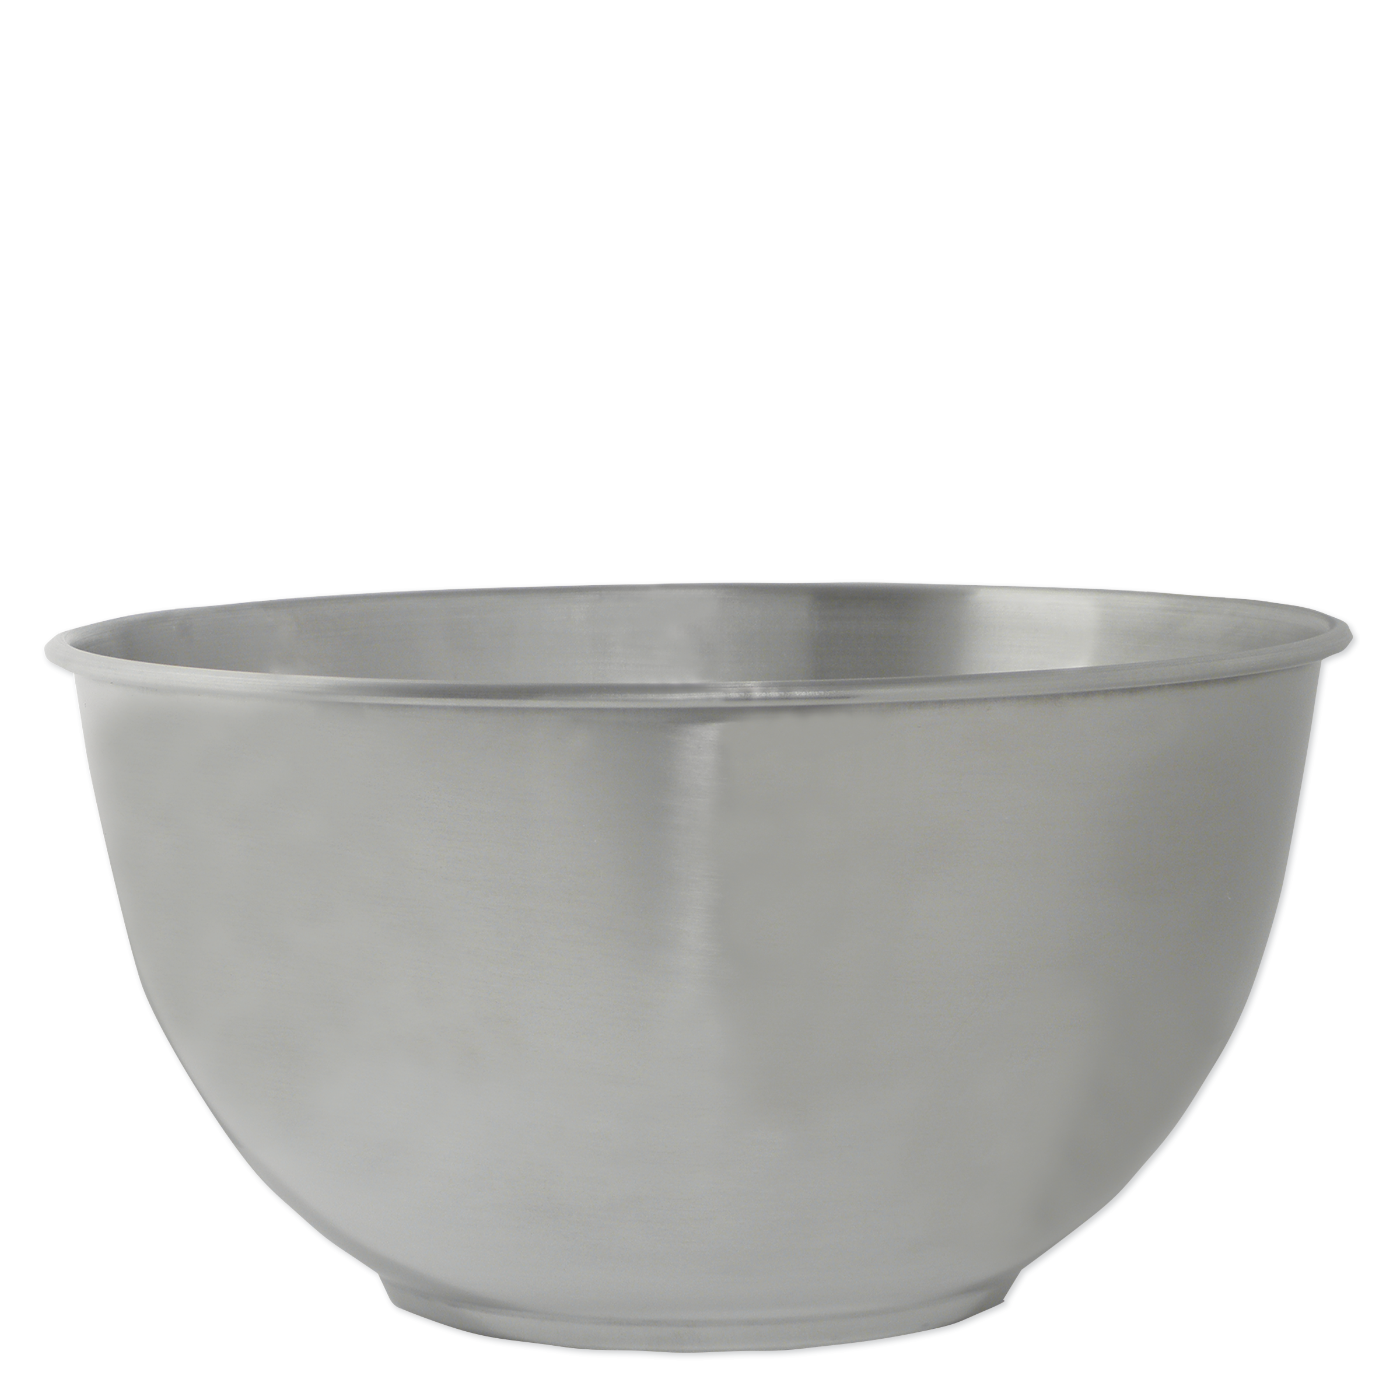 Stainless Steel Mixing Bowl - 3 Quart